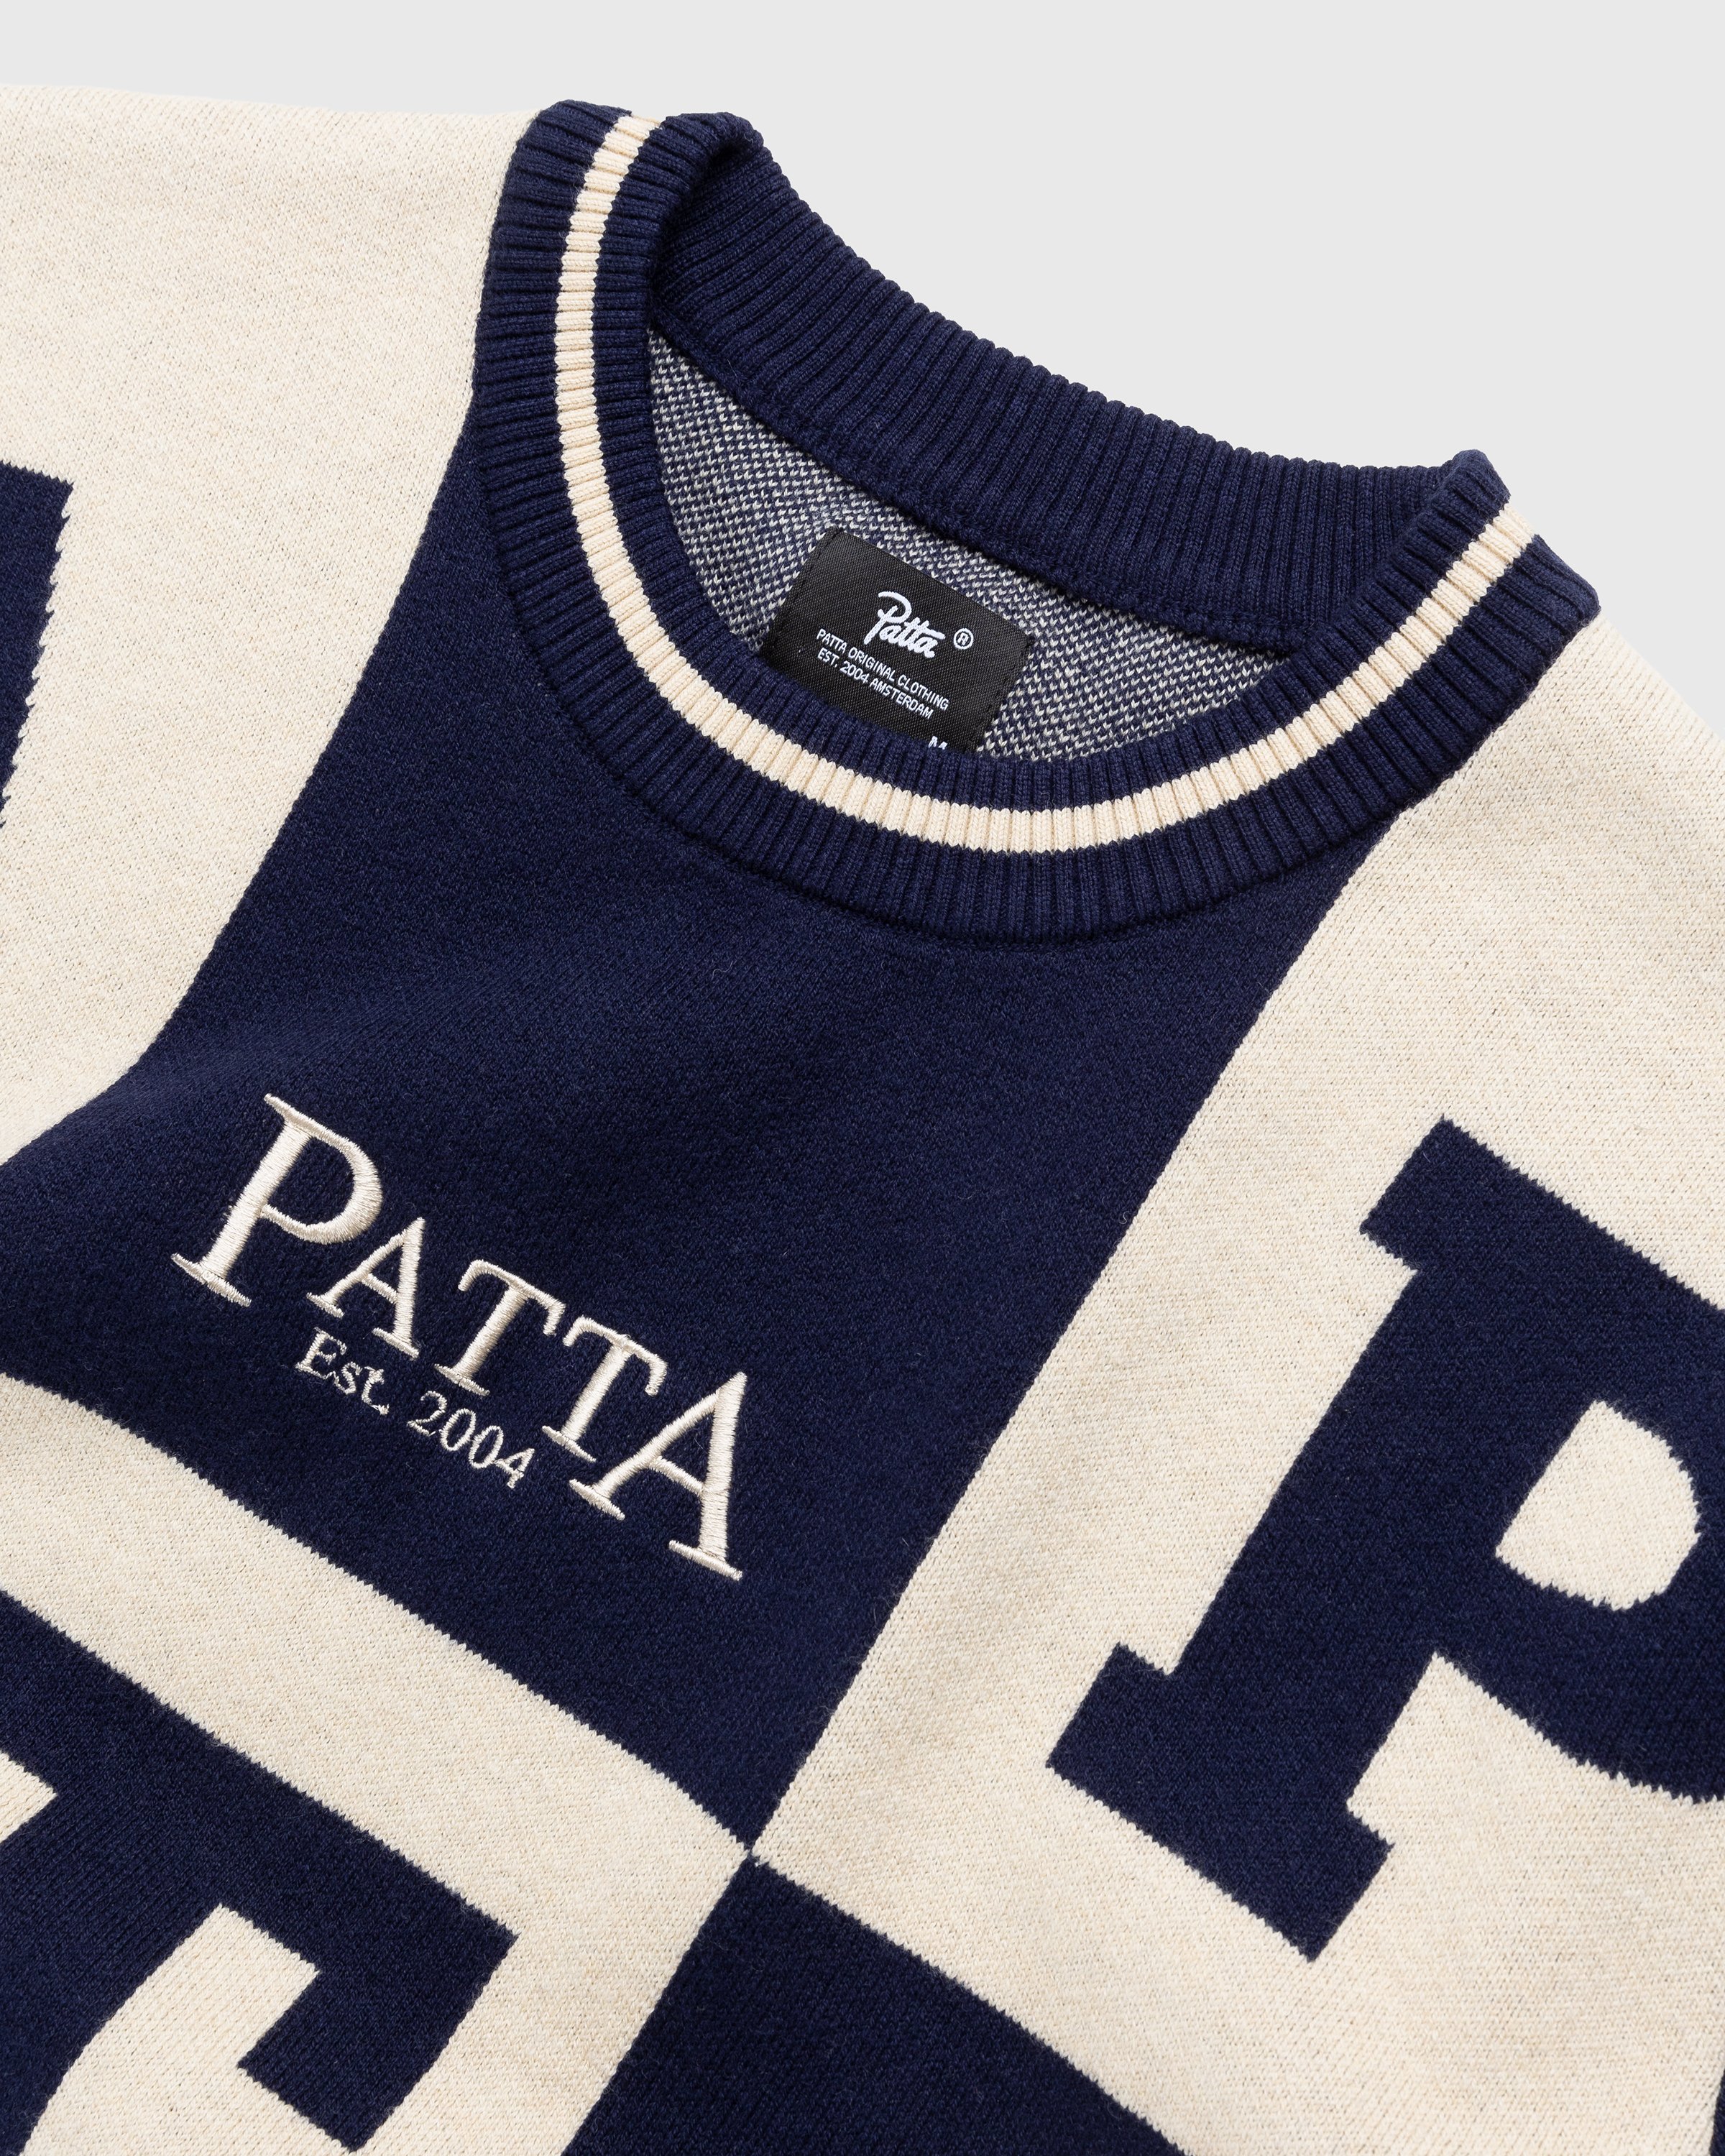 Patta - Alphabet Knitted Sweater Evening Blue/Pale Khaki - Clothing - Green - Image 5